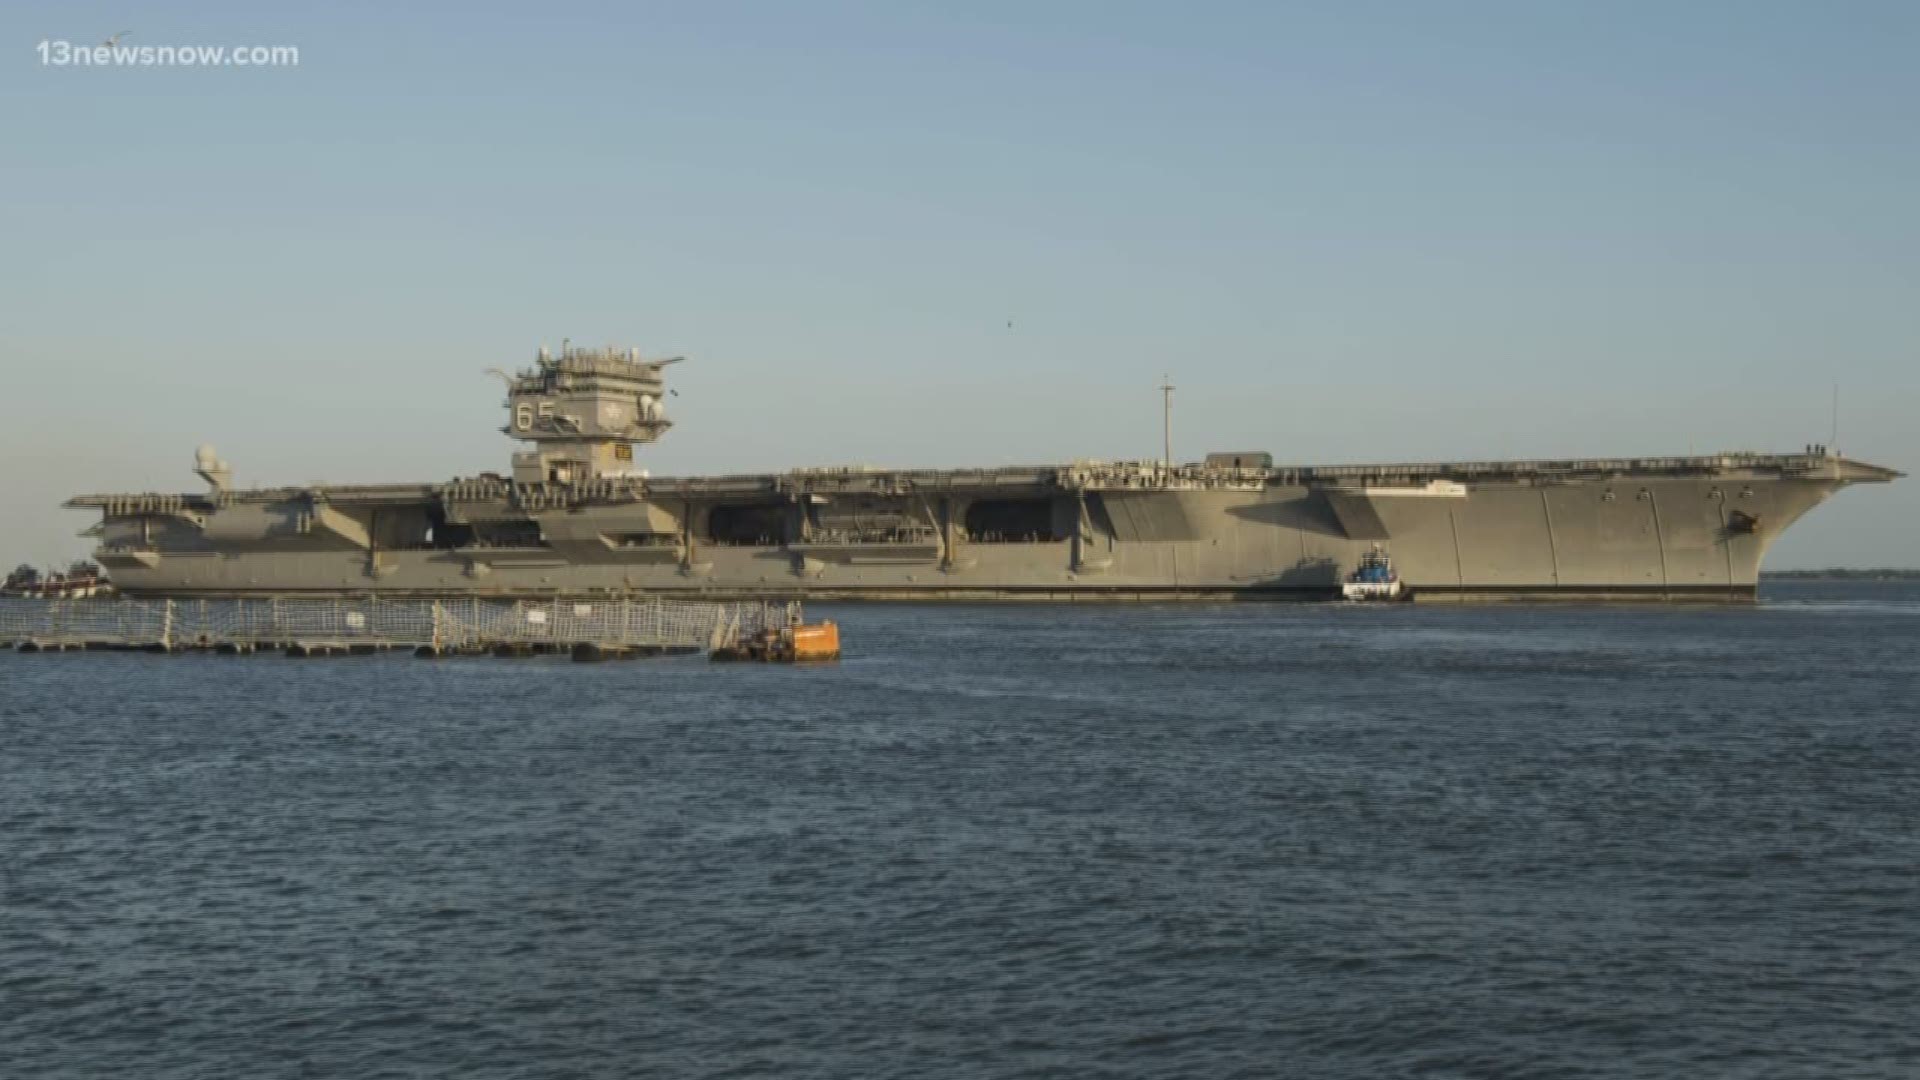 An open house is being held to discuss the environmental impact that decommissioning the ex-Enterprise aircraft carrier in Newport News.